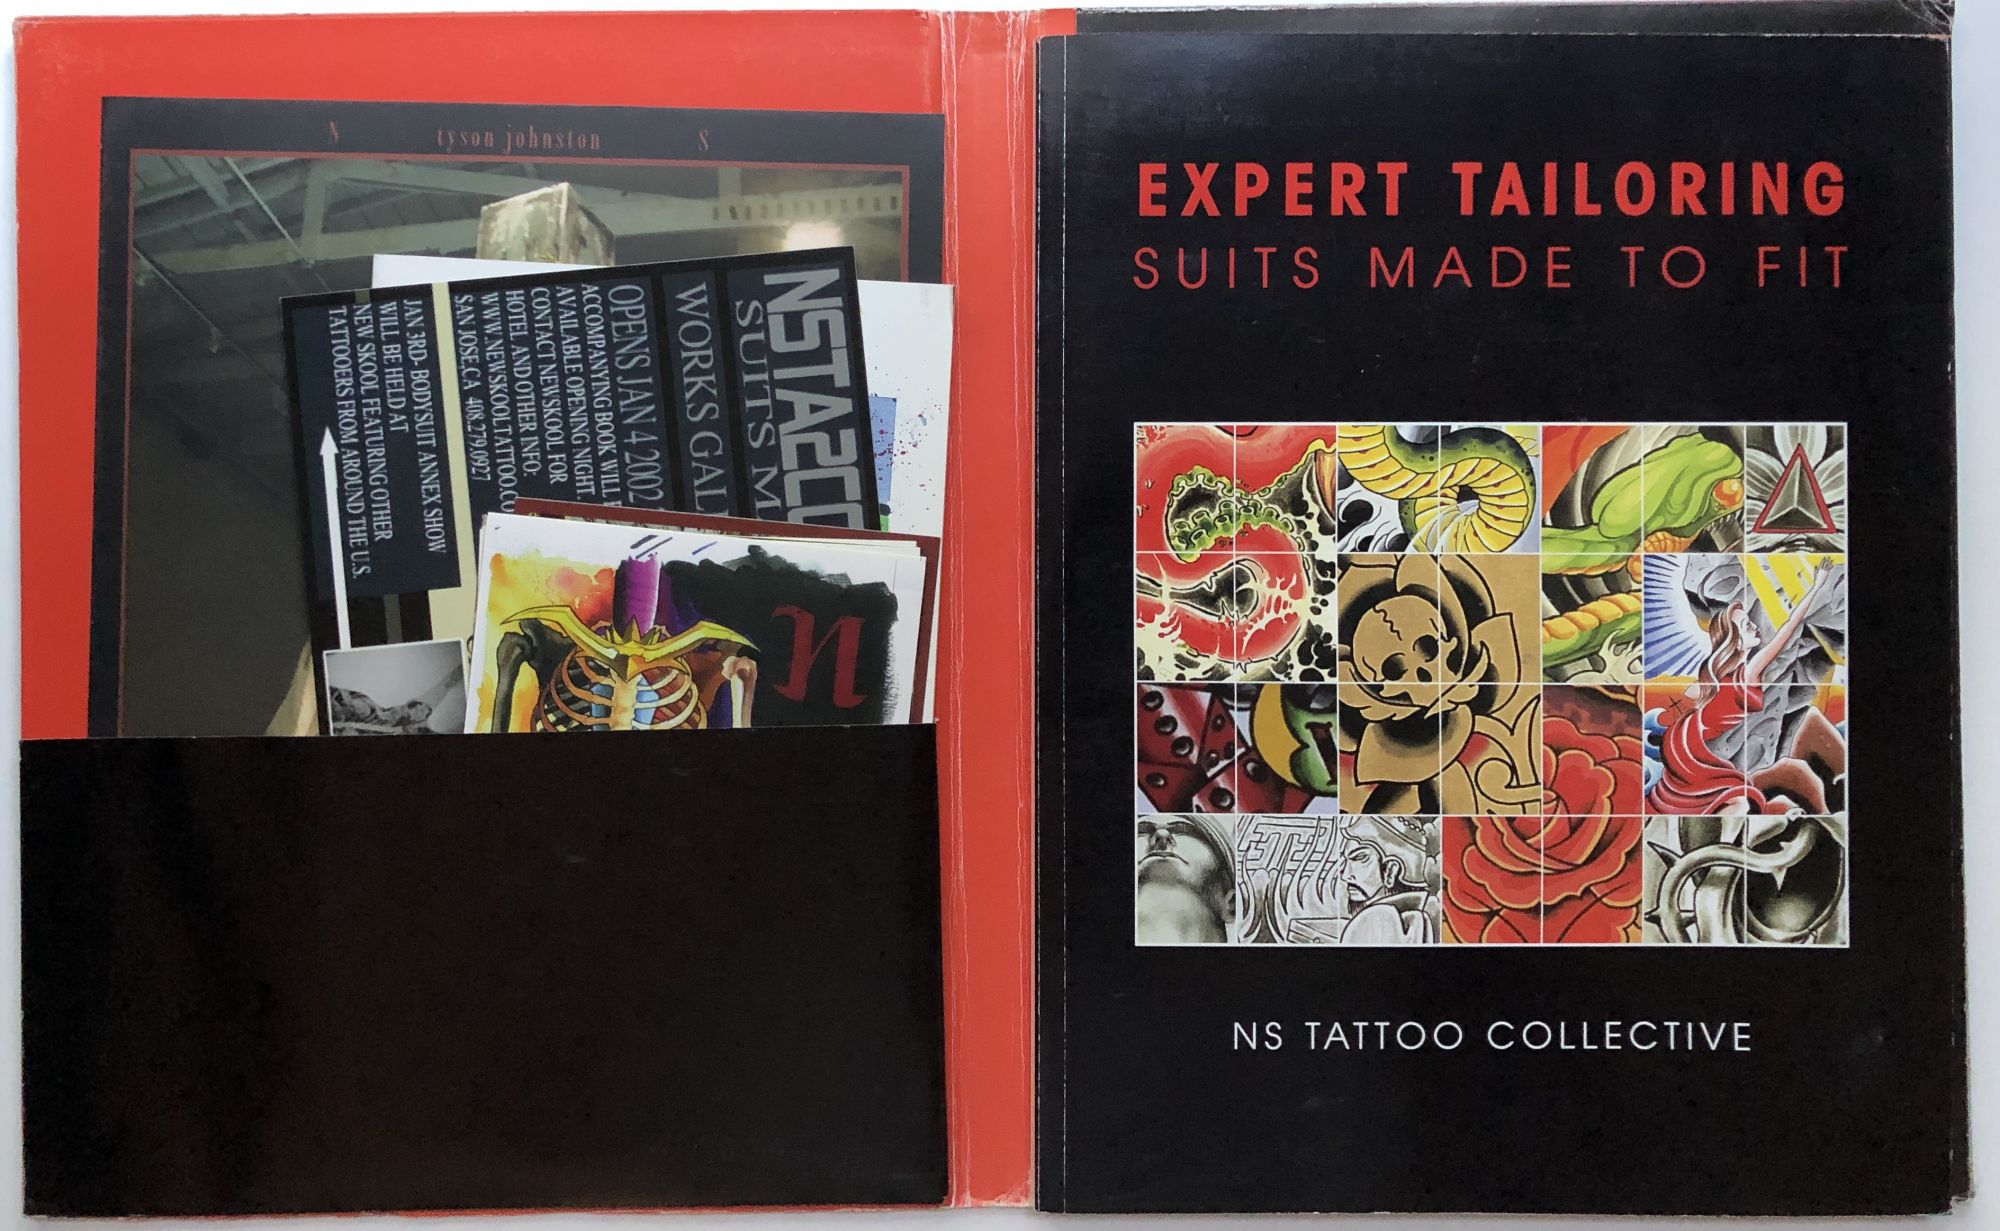 Expert Tailoring: Suits Made to Fit, exhibiting in San Jose, California and  Osaka, Japan by Tattoo, Adrian T. Lee, Paco Excel, Ron Earhart on Common